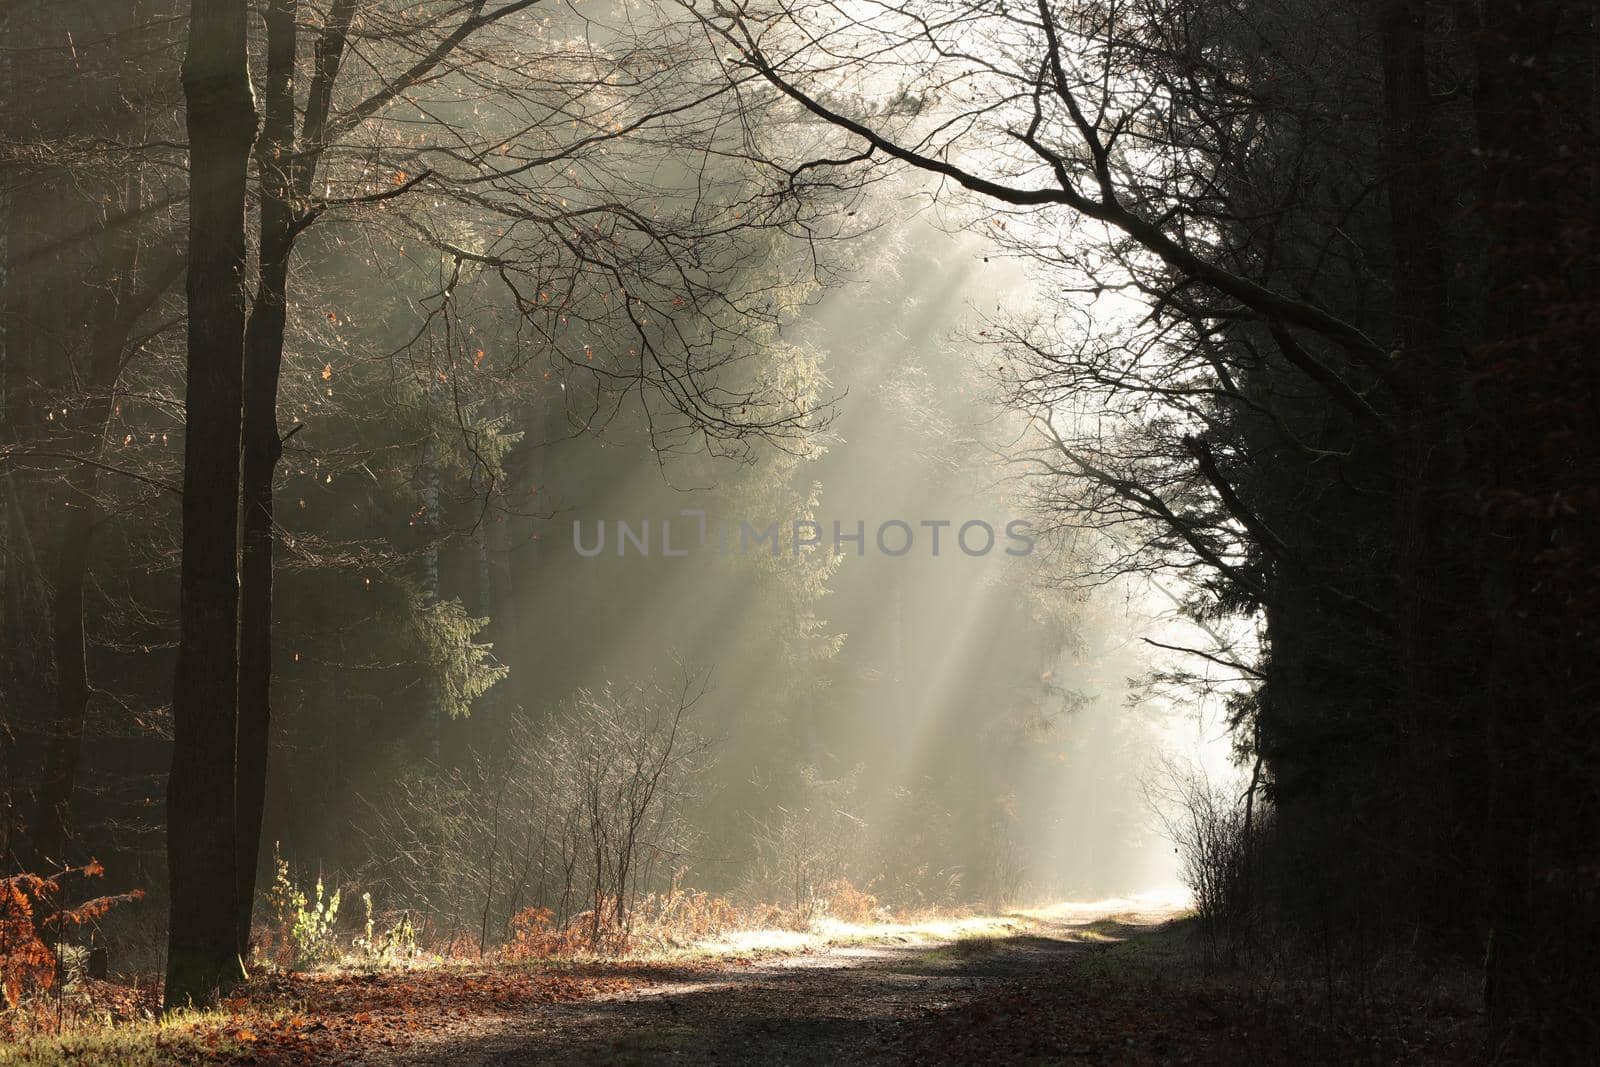 Forest path during sunrise by nature78